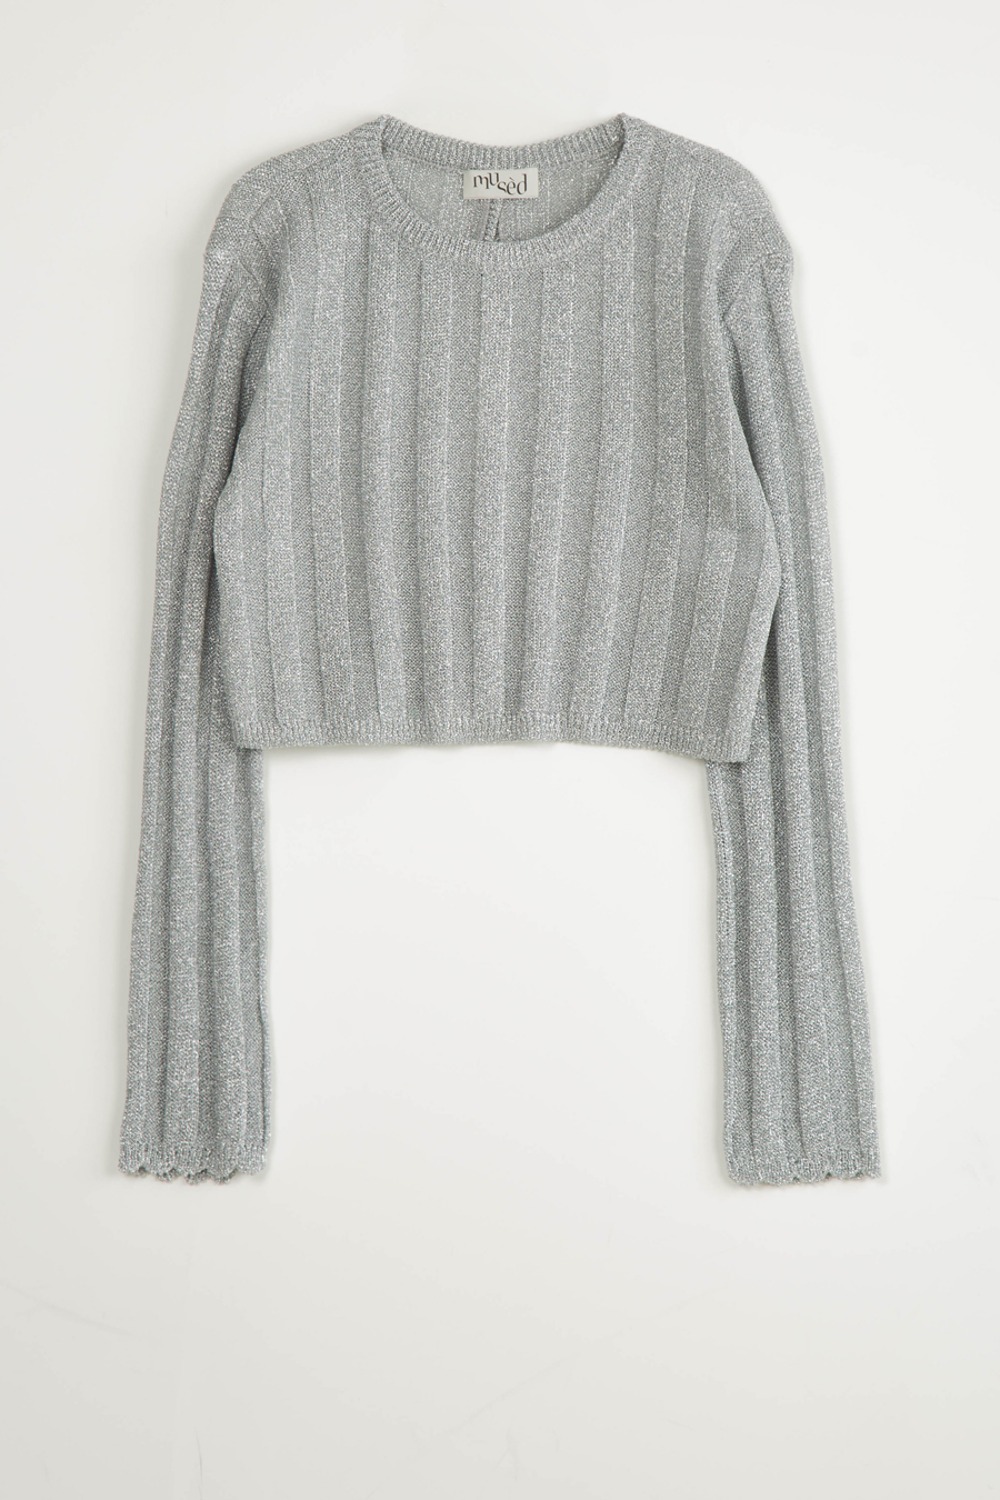 (24SS) MUSED VAGUE KNIT CROP TOP SILVER